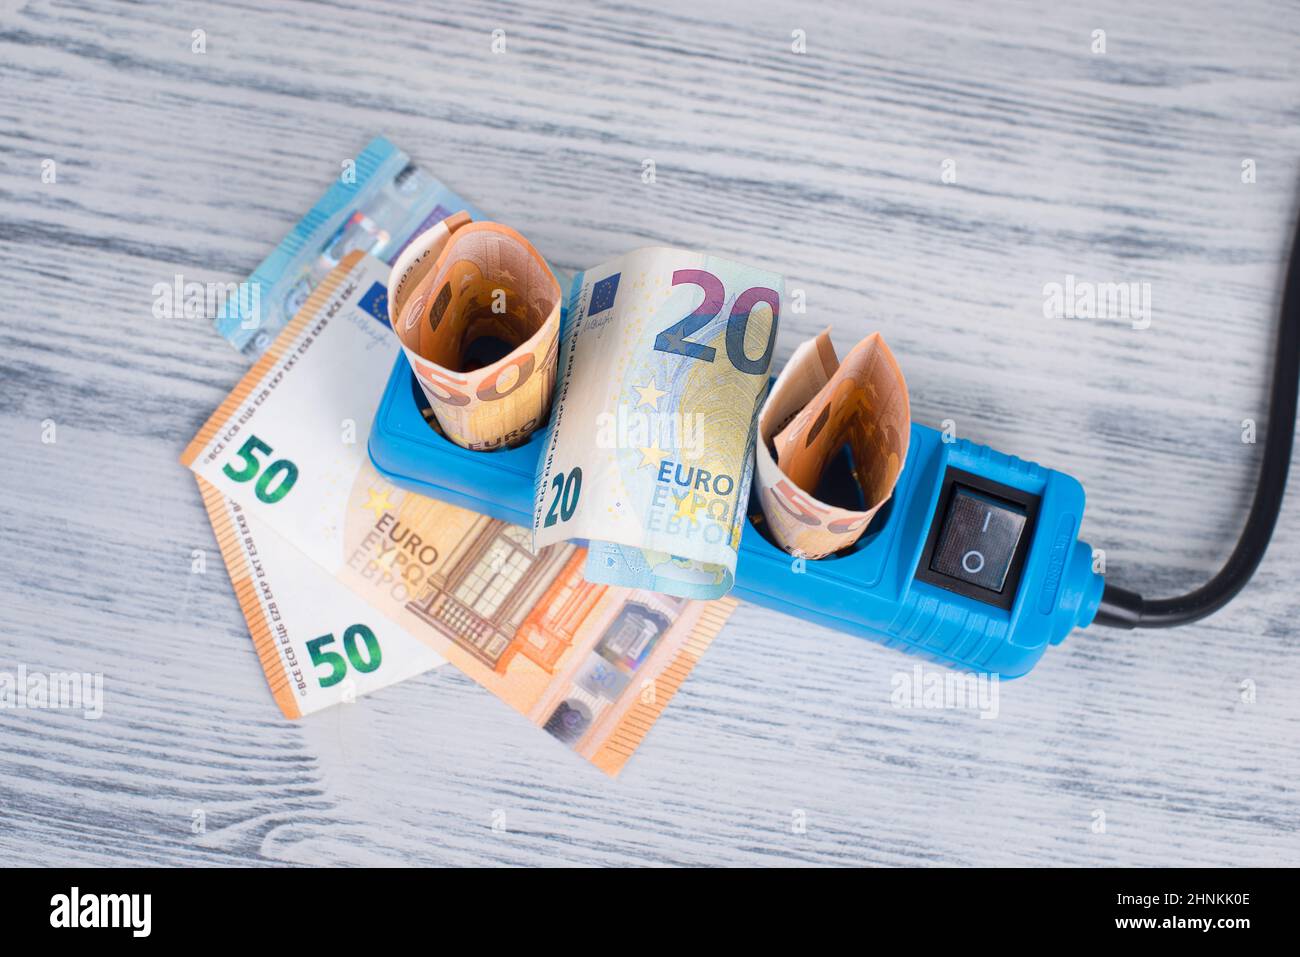 Euro banknotes in a power outlet, rising prices, expensive green electricity, Germany Stock Photo